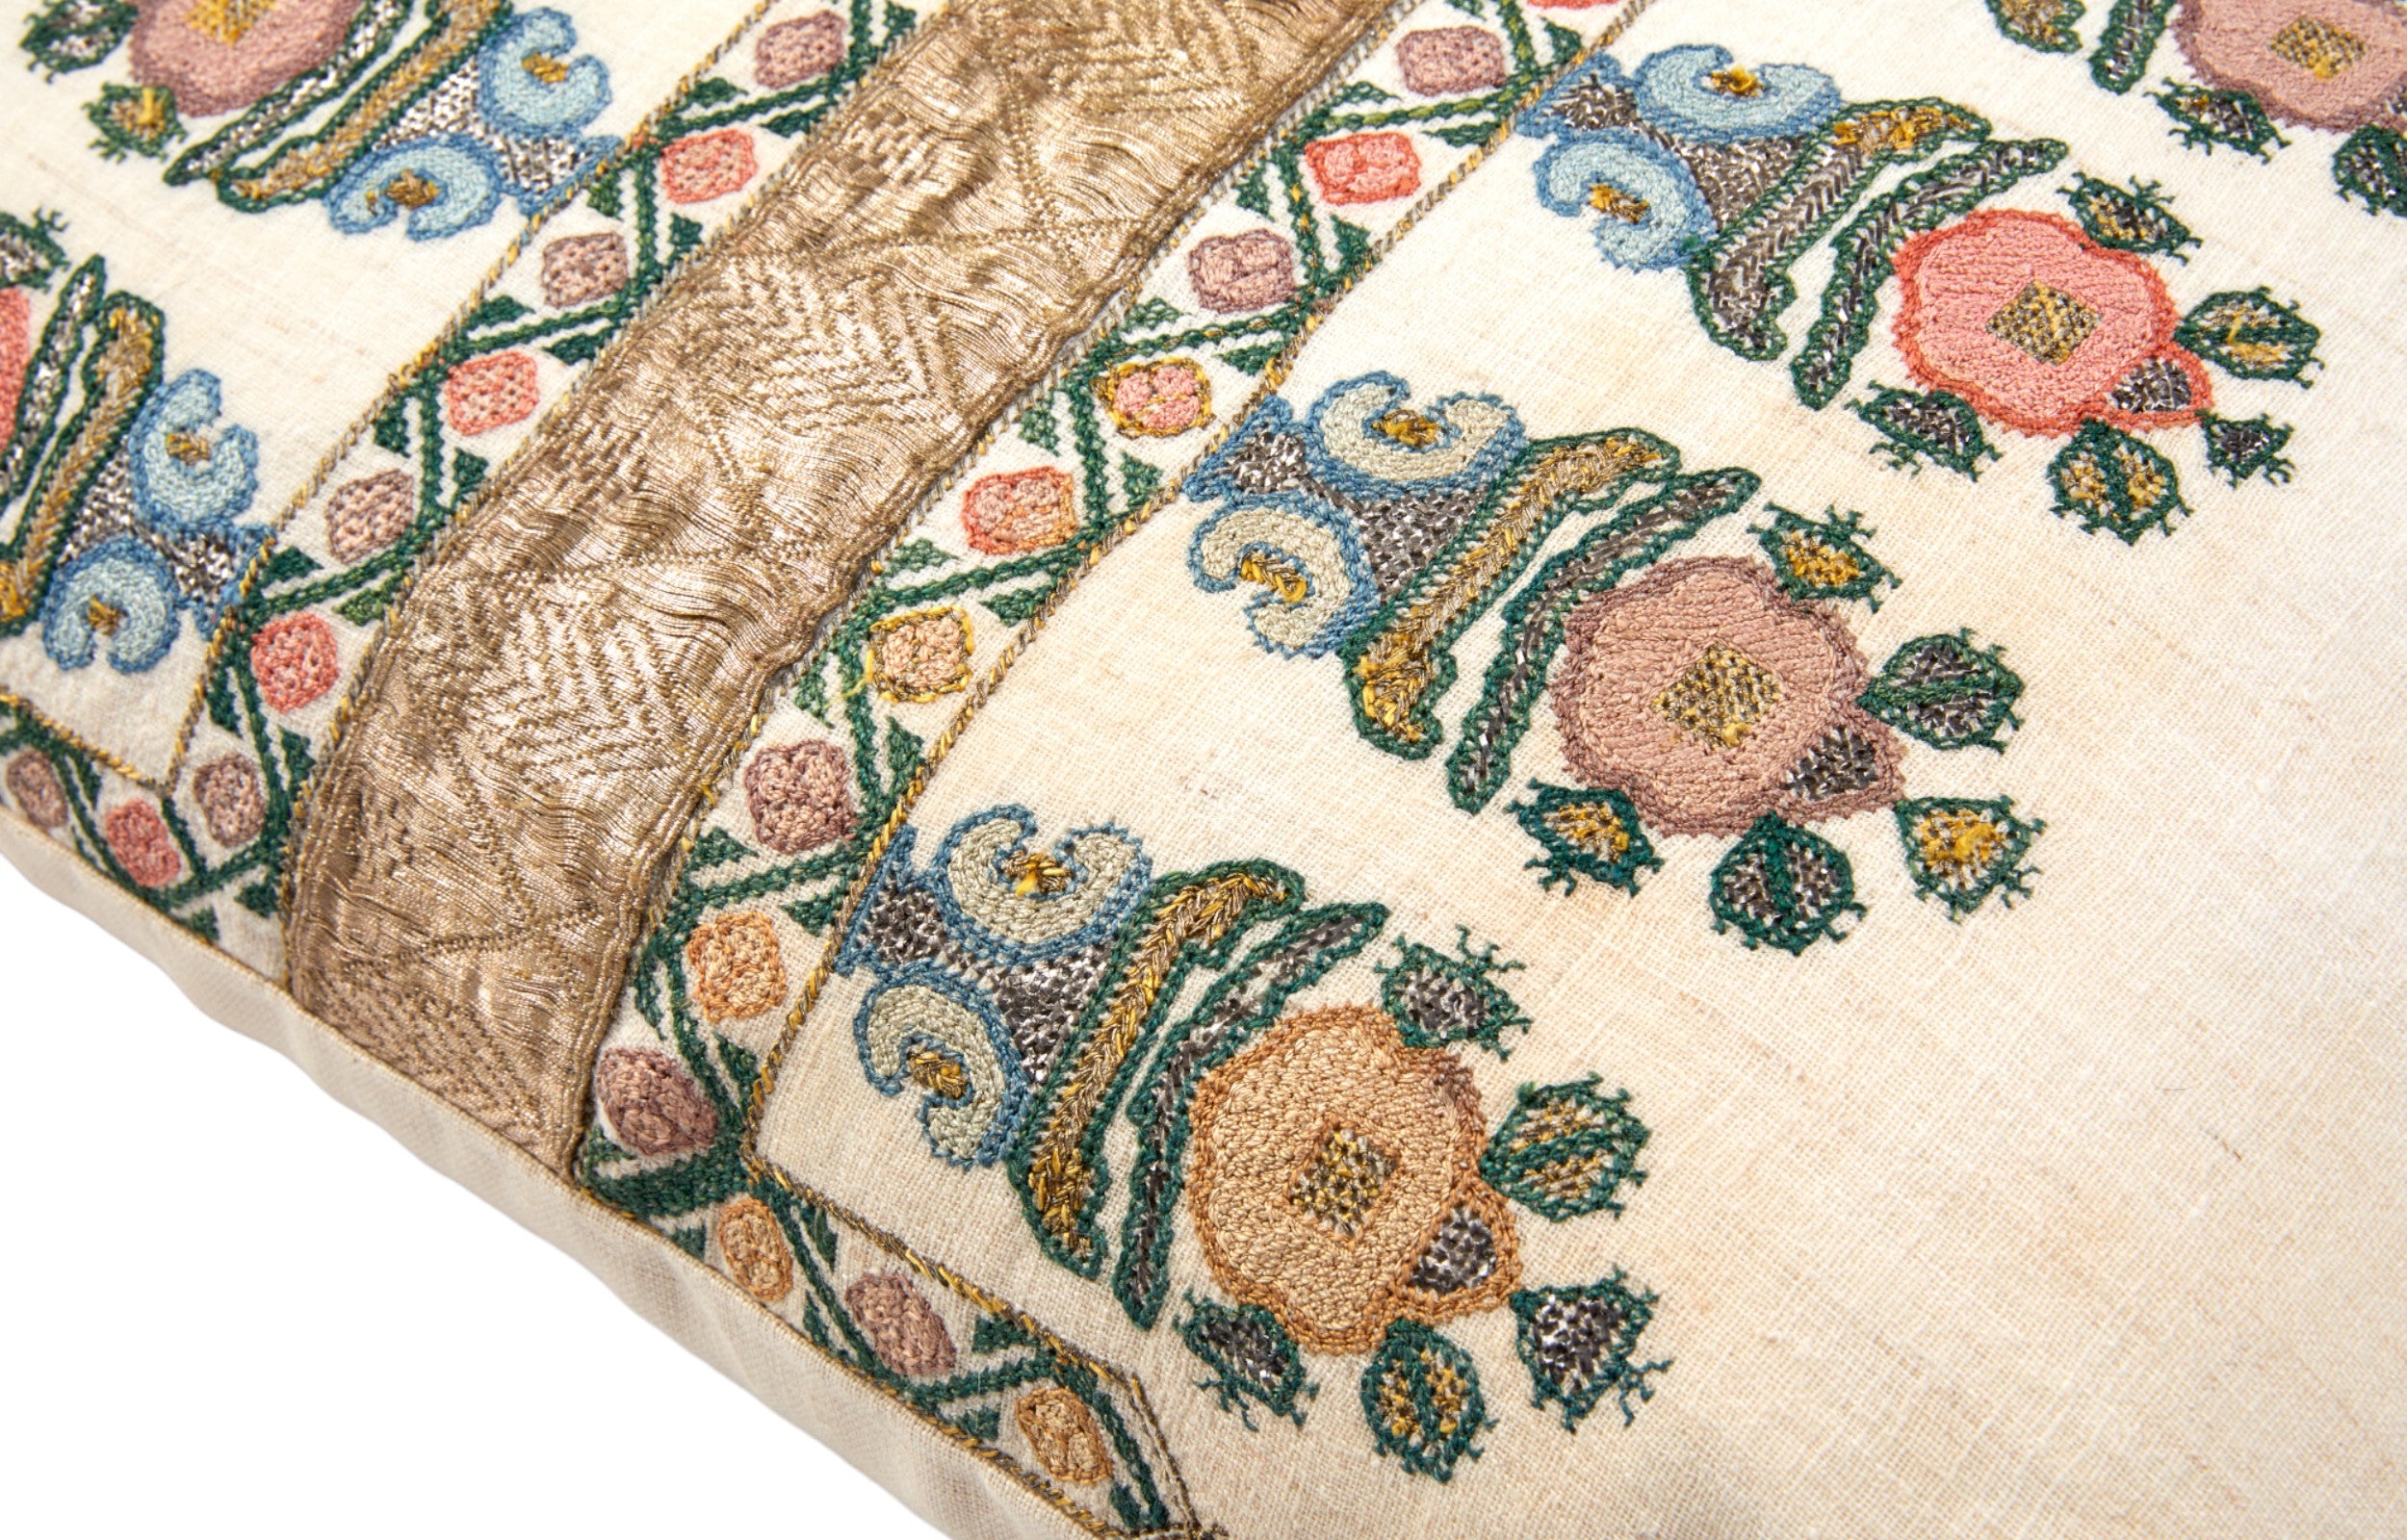 A Cushion made from an Embroidered Ottoman Fragment with Antique Braid and Corner Tassels